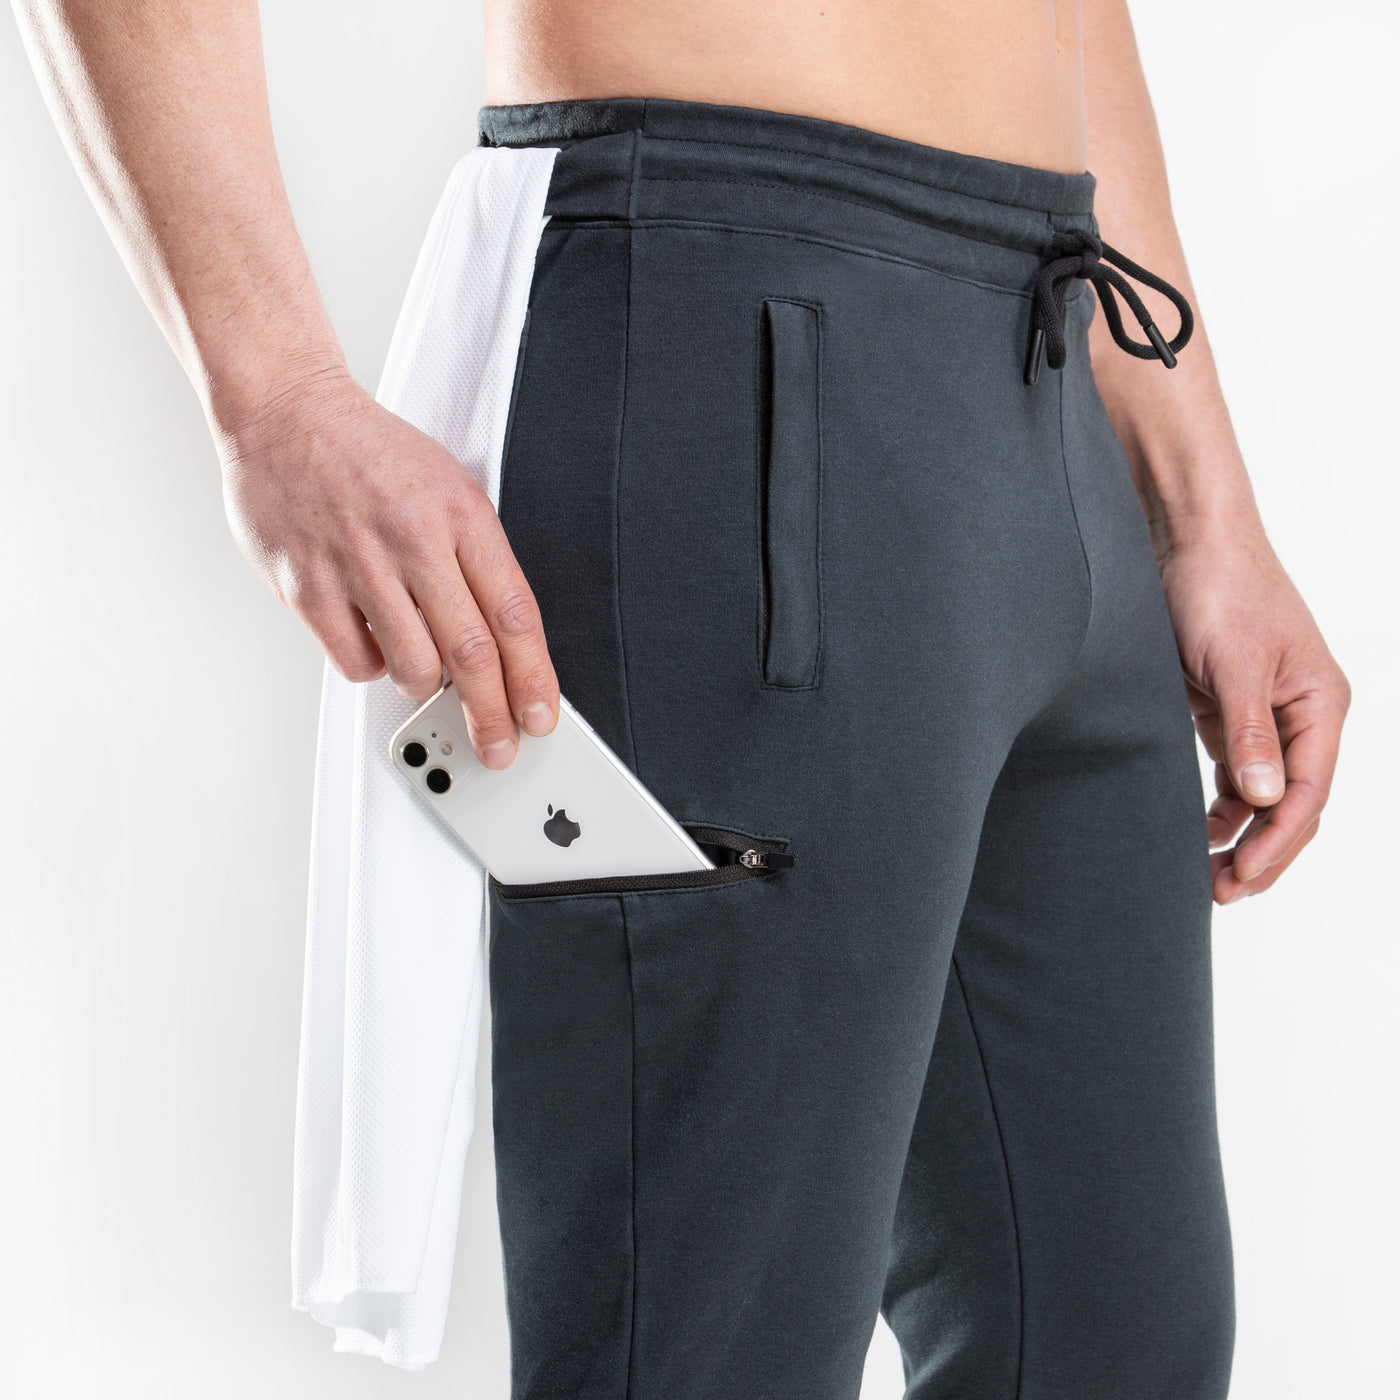 NZG NonZero Gravity Antimicrobial Odor & Sweat Proof UV 50+  ZinTex Slim Fit Joggers with front and back pockets 